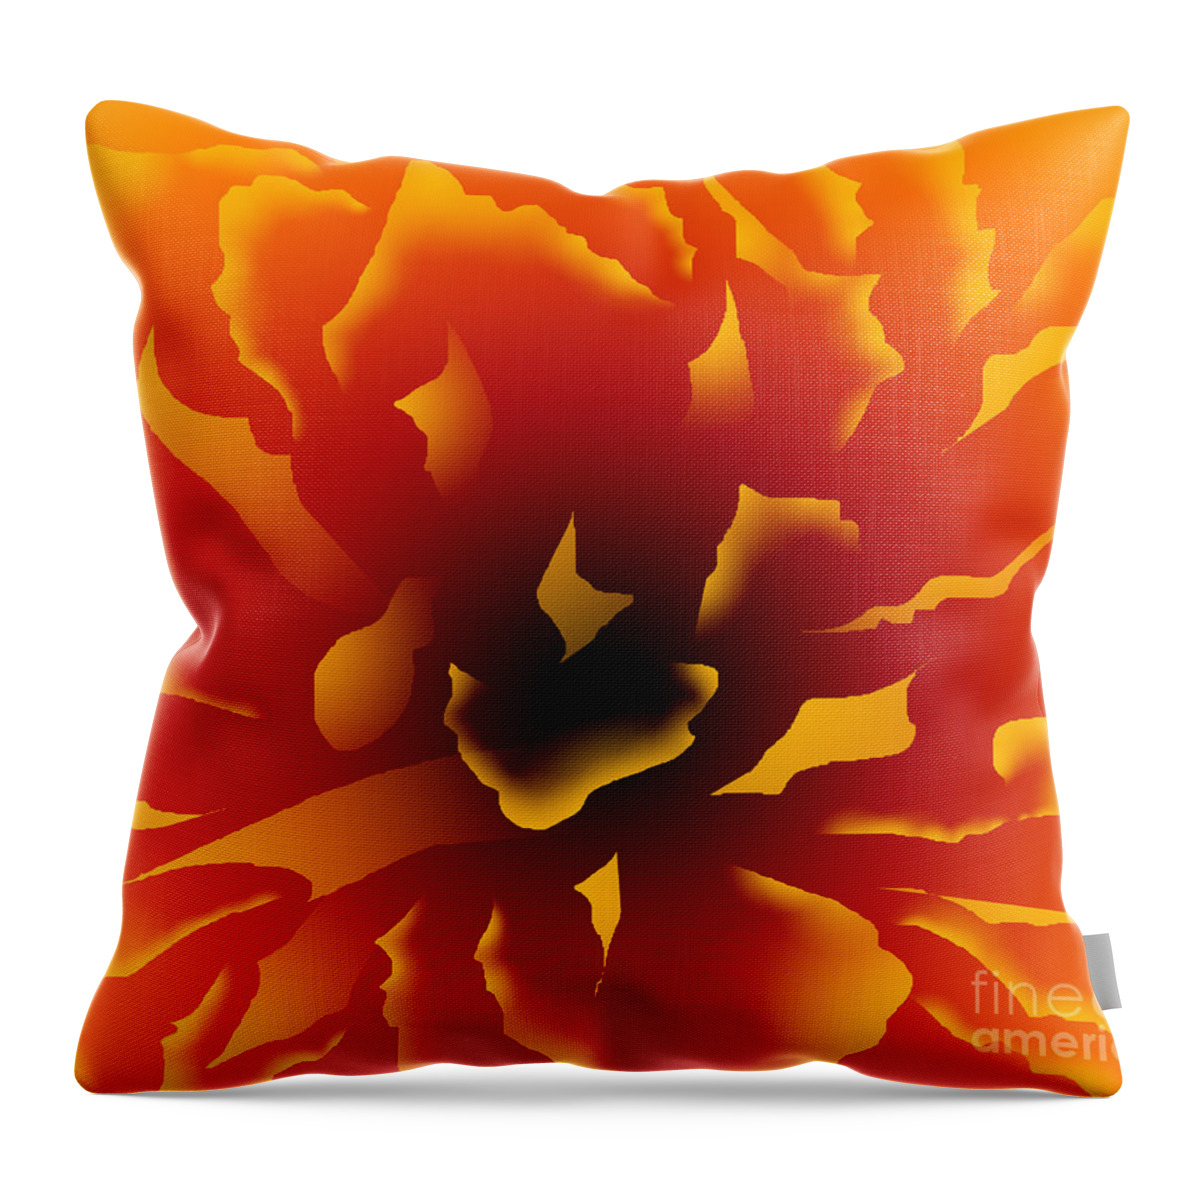 Peony Throw Pillow featuring the digital art Fire Peony by Alice Chen